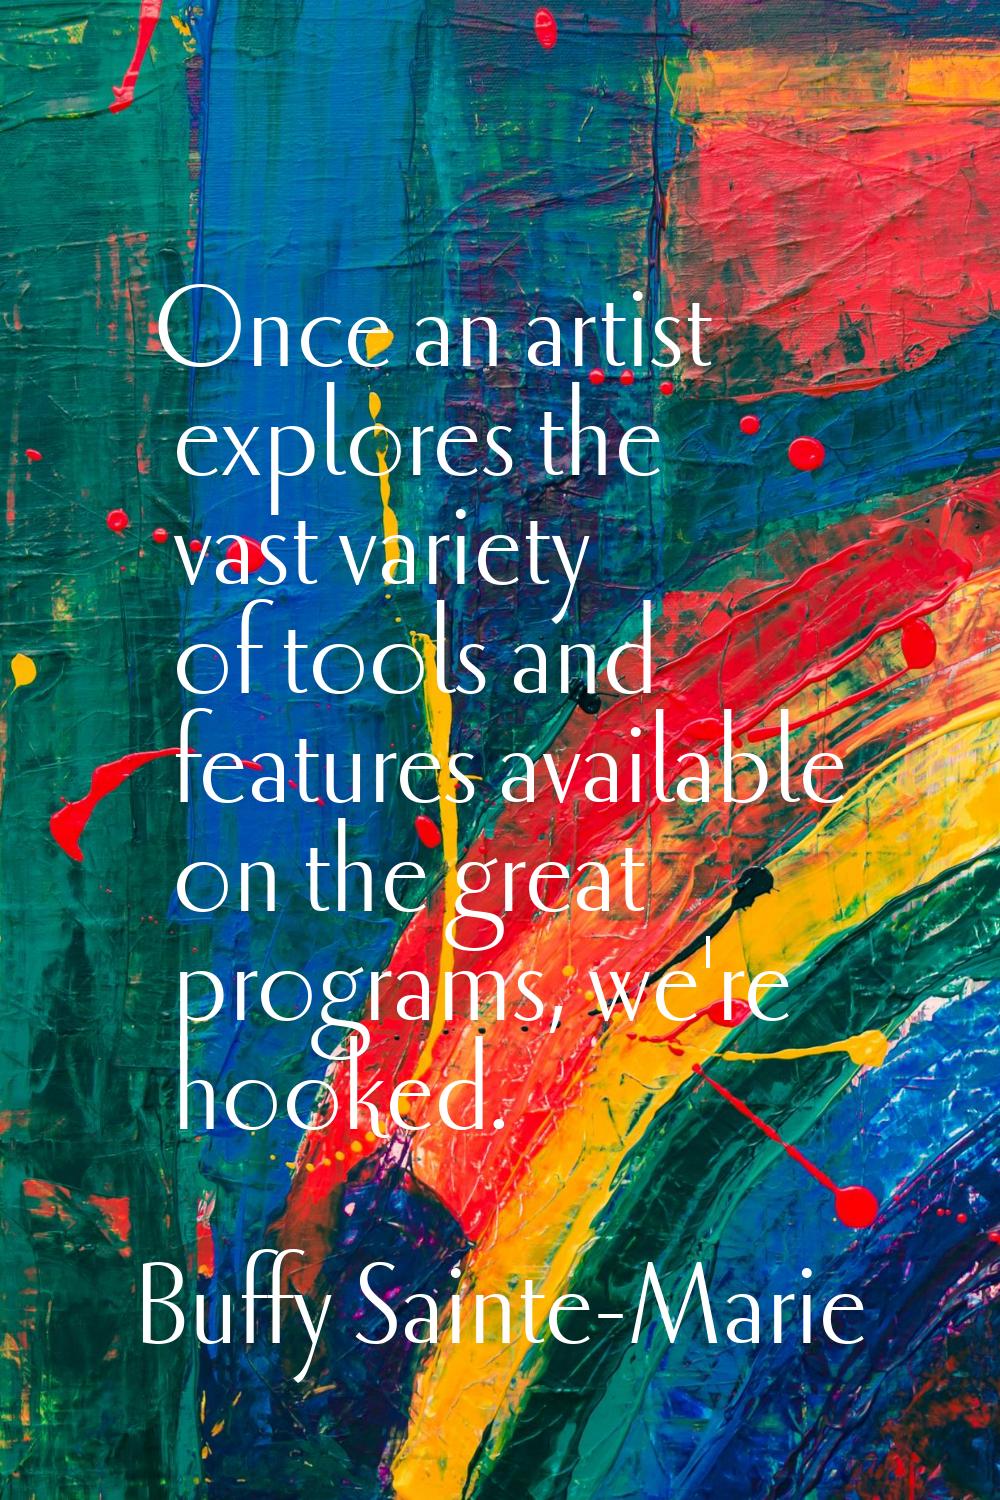 Once an artist explores the vast variety of tools and features available on the great programs, we'